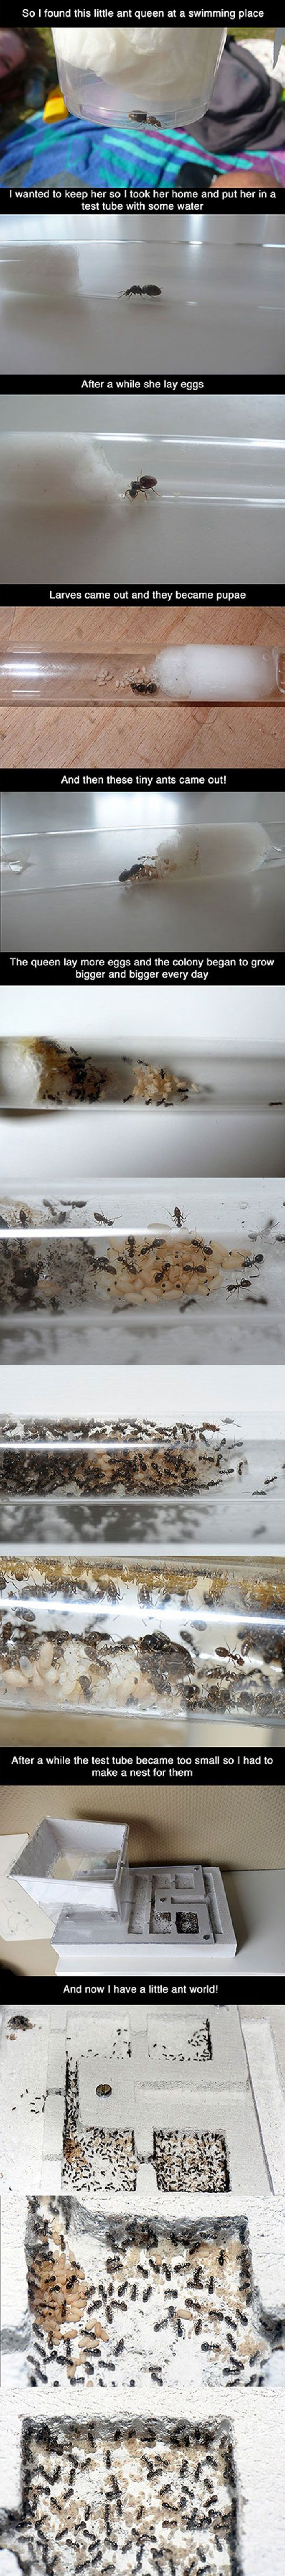 Creating Your Own Ant Army